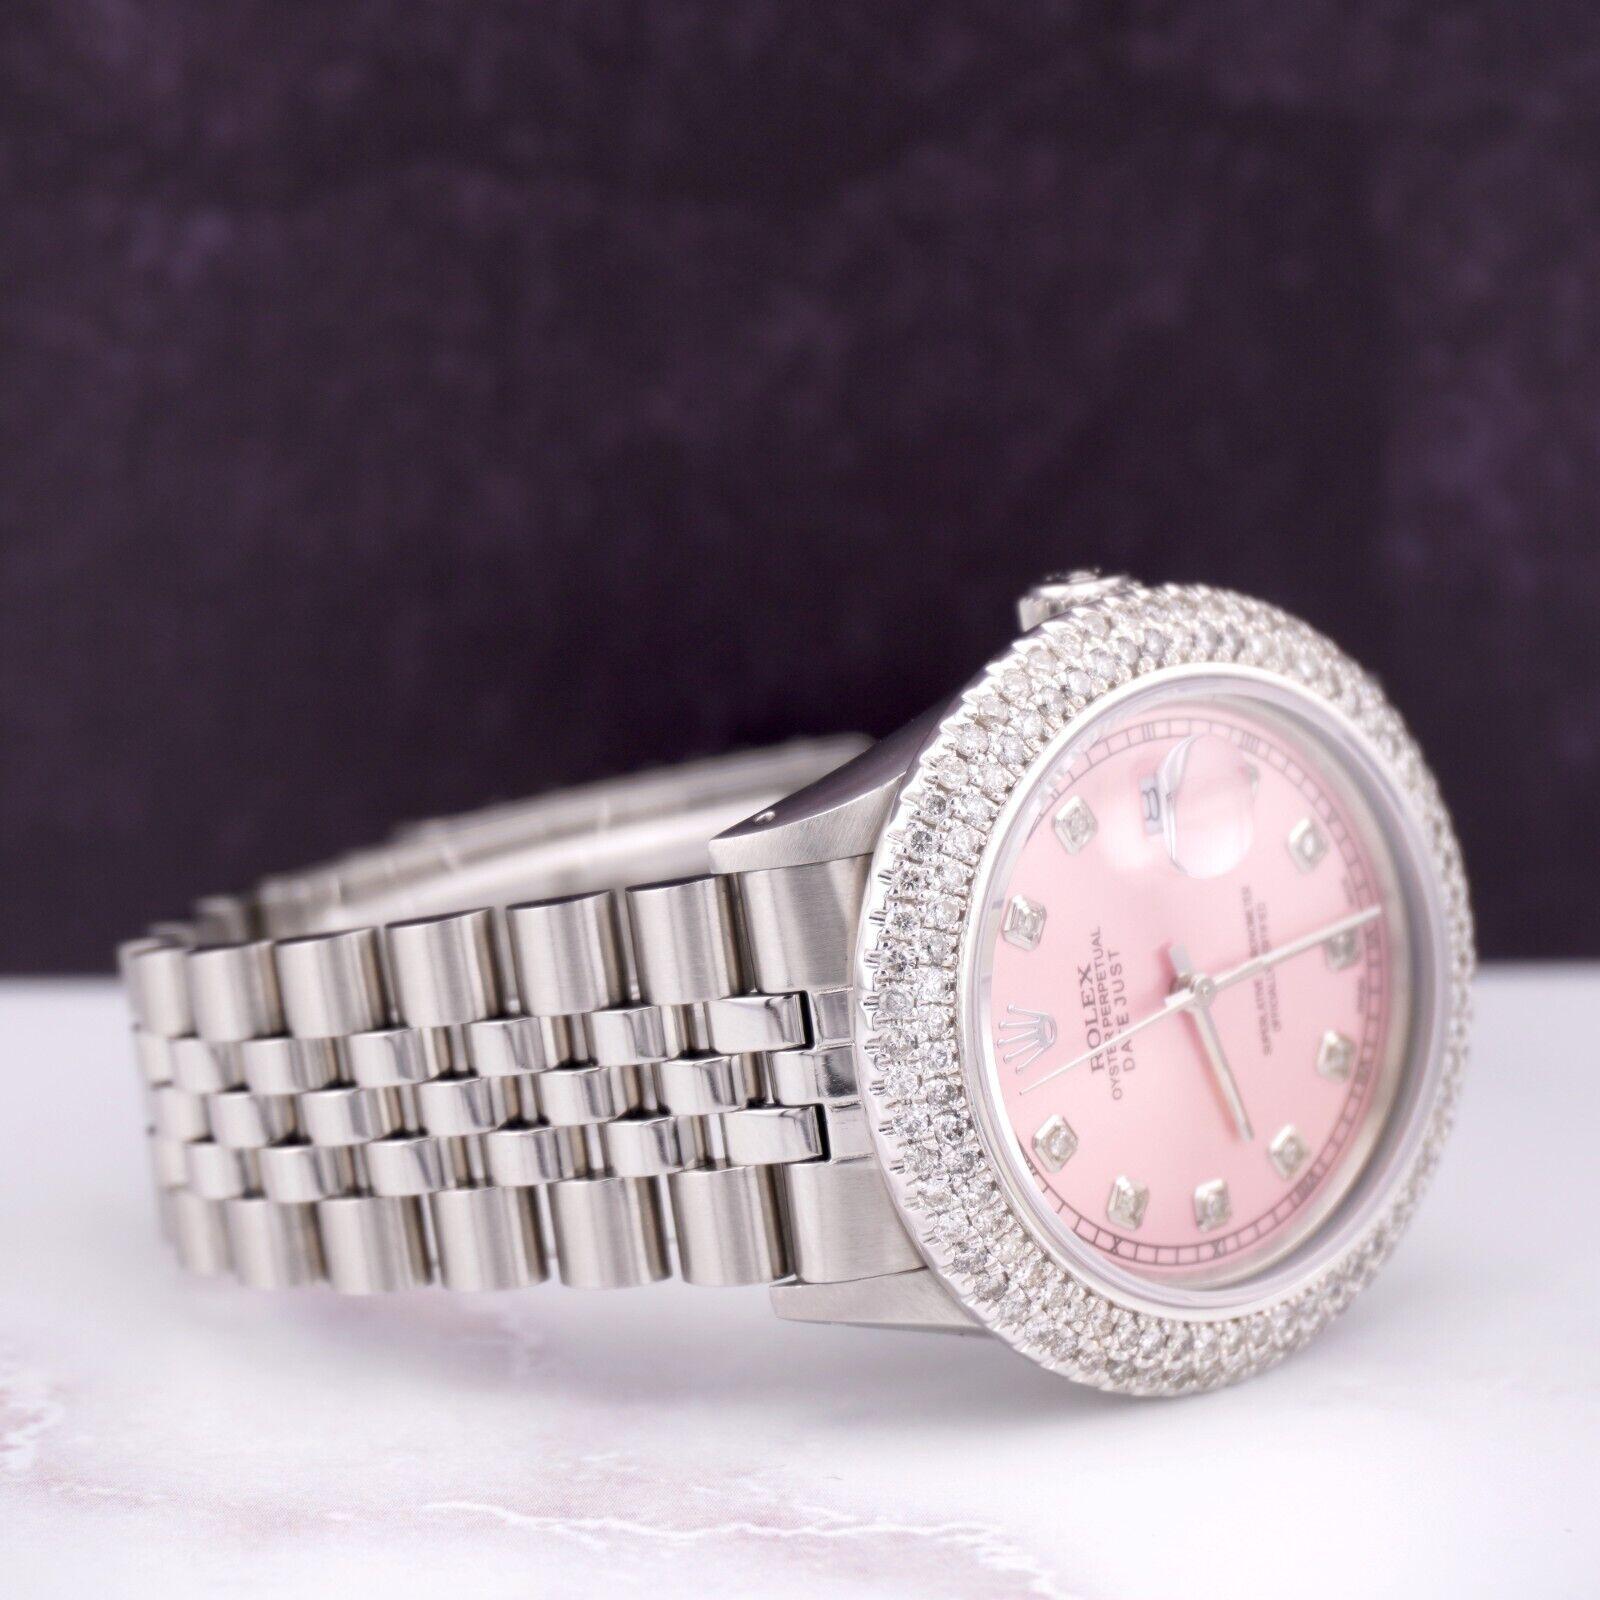 Rolex Datejust 36mm Watch. A Pre-owned watch w/ Gift Box. Watch is 100% Authentic and Comes with Authenticity Card. Watch Reference is 16104 and is in Excellent Condition (See Pictures). The dial color is Pink (We have other colors. Ask to see more)